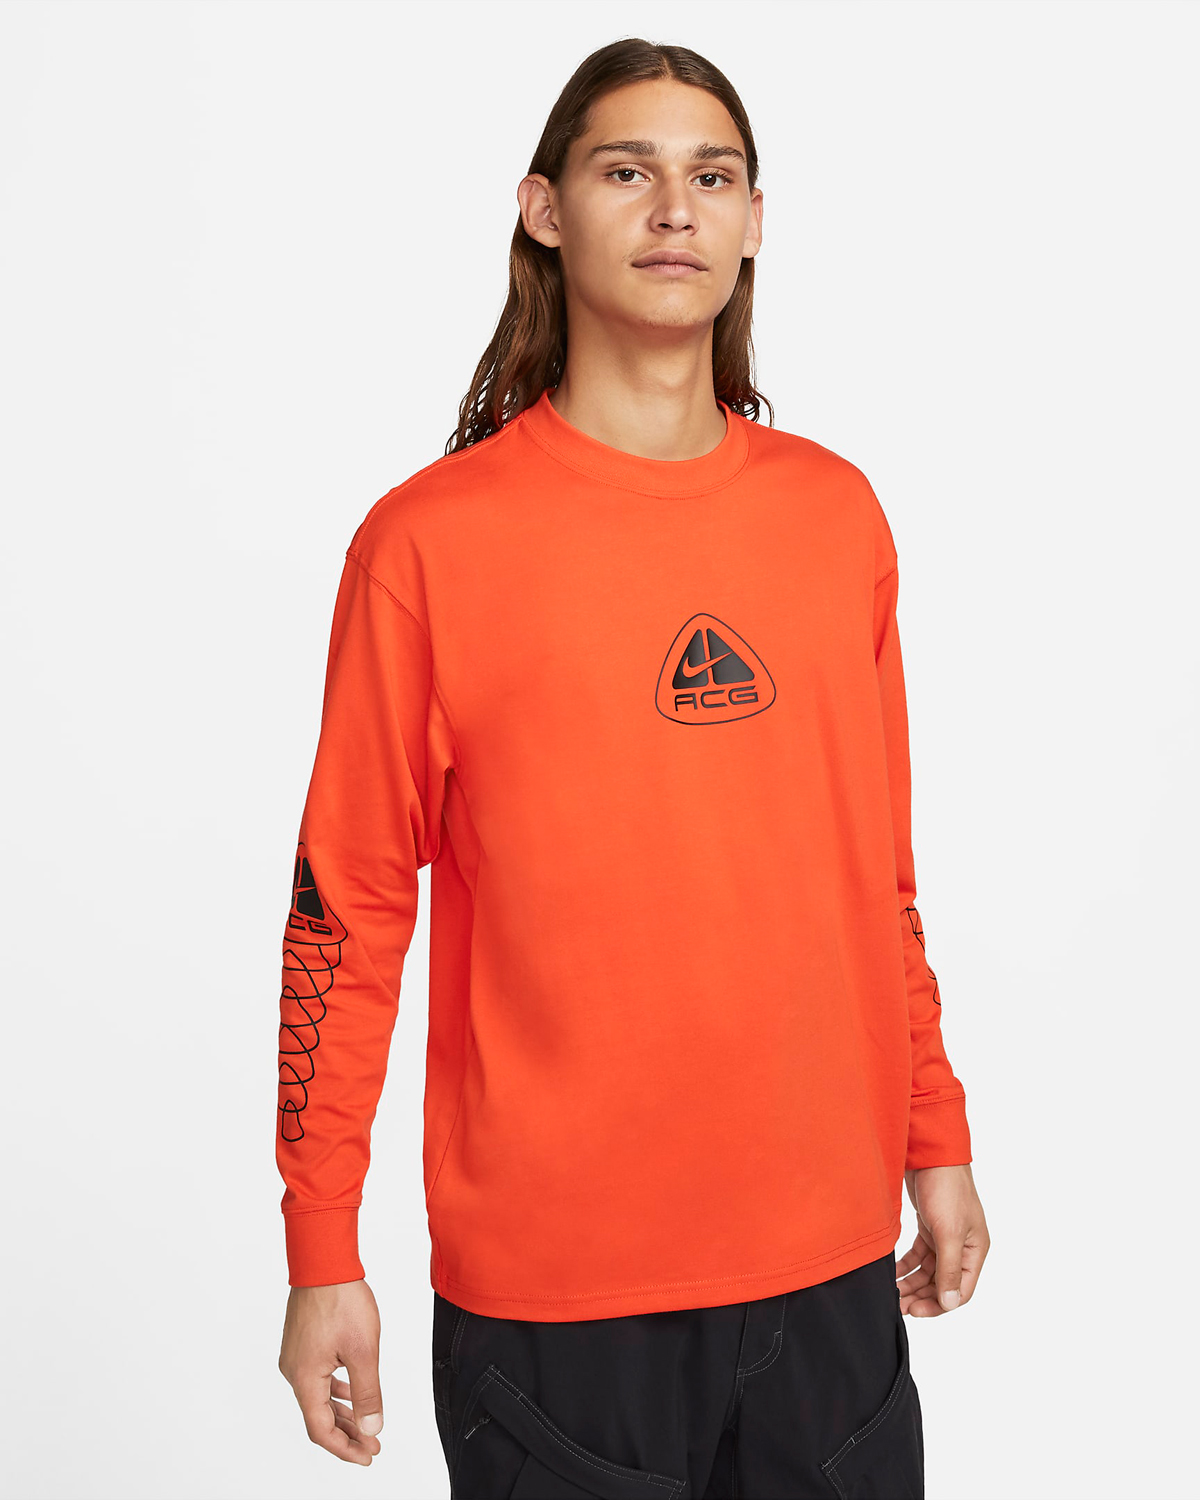 Nike-ACG-Long-Sleeve-T-Shirt-Picante-Red